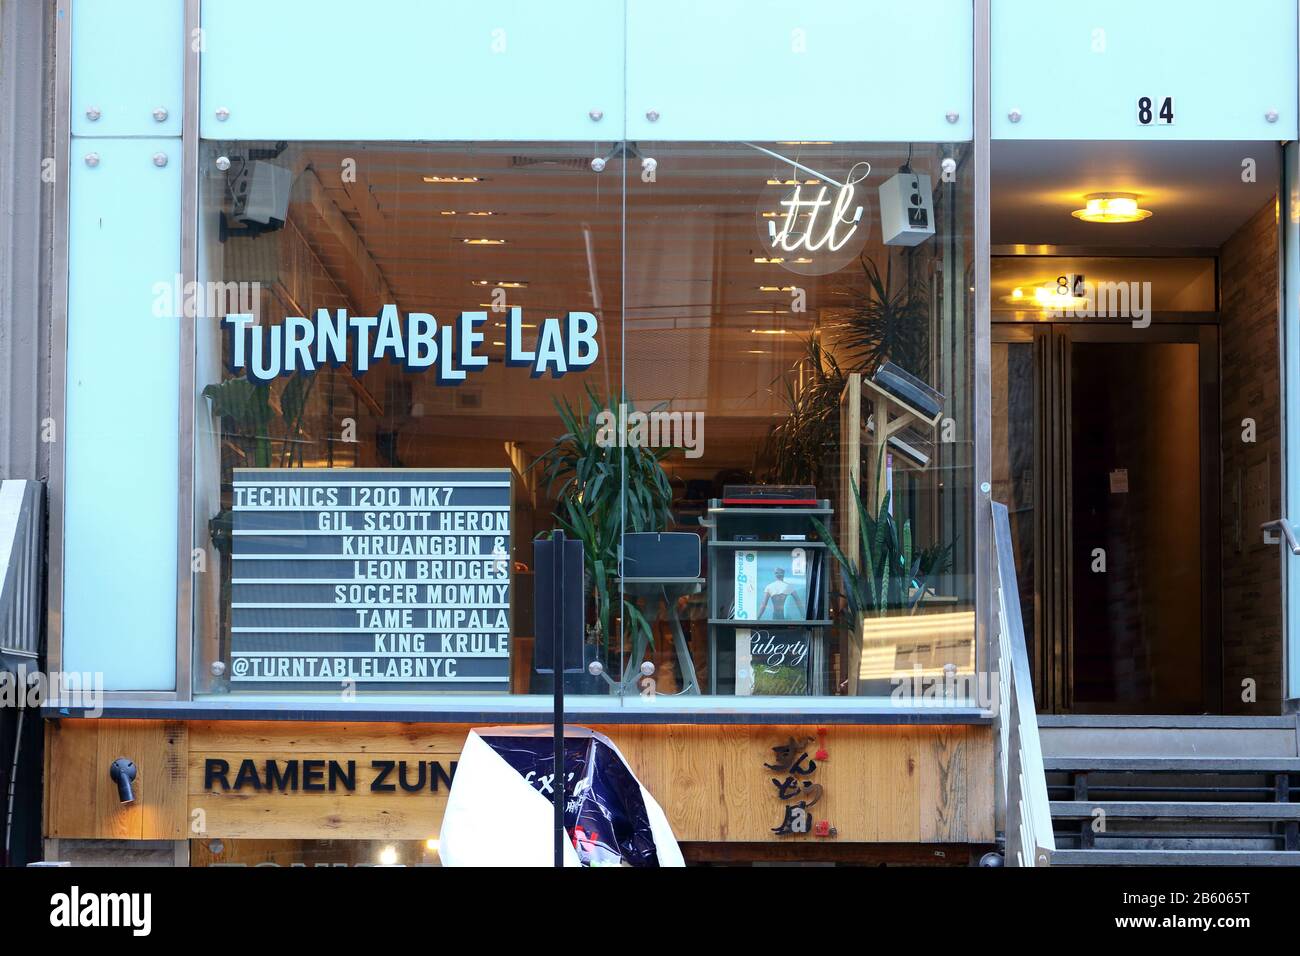 [historical storefront] Turntable Lab, 84 East 10th Street, New York, NYC storefront photo of a DJ-oriented record shop in the East Village. Stock Photo